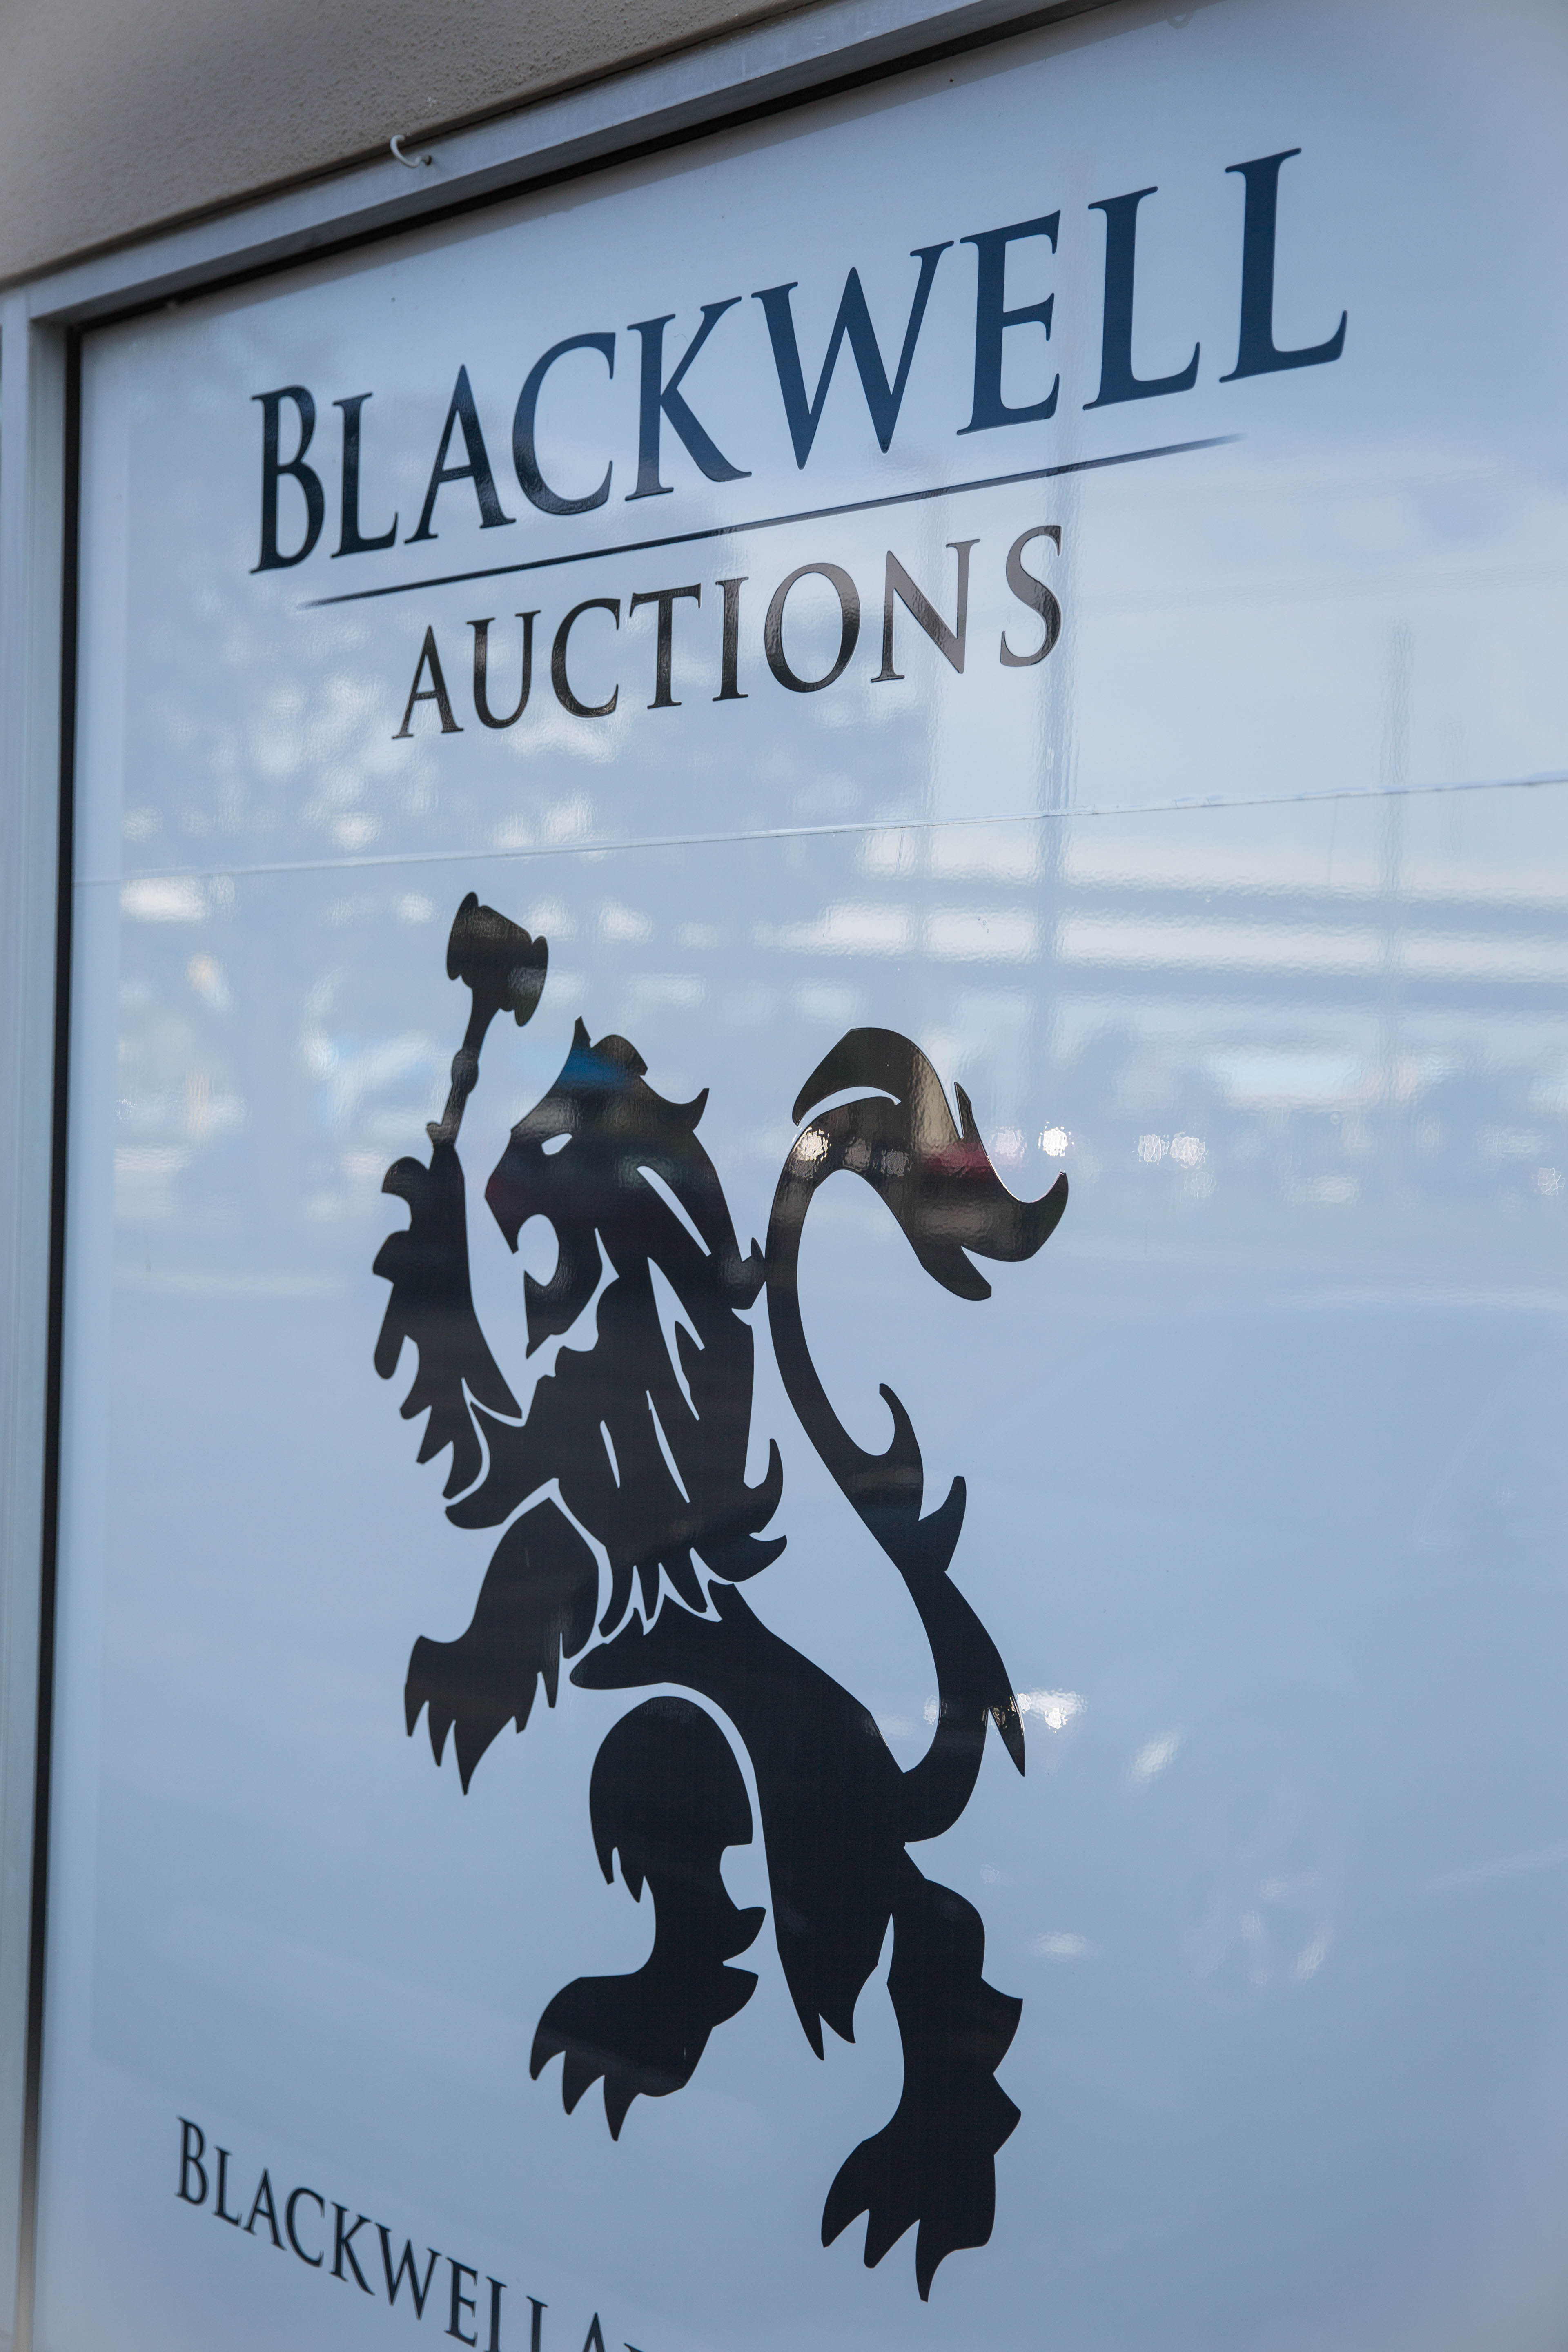 Blackwell Auctions. Photo by Emily Canfield.